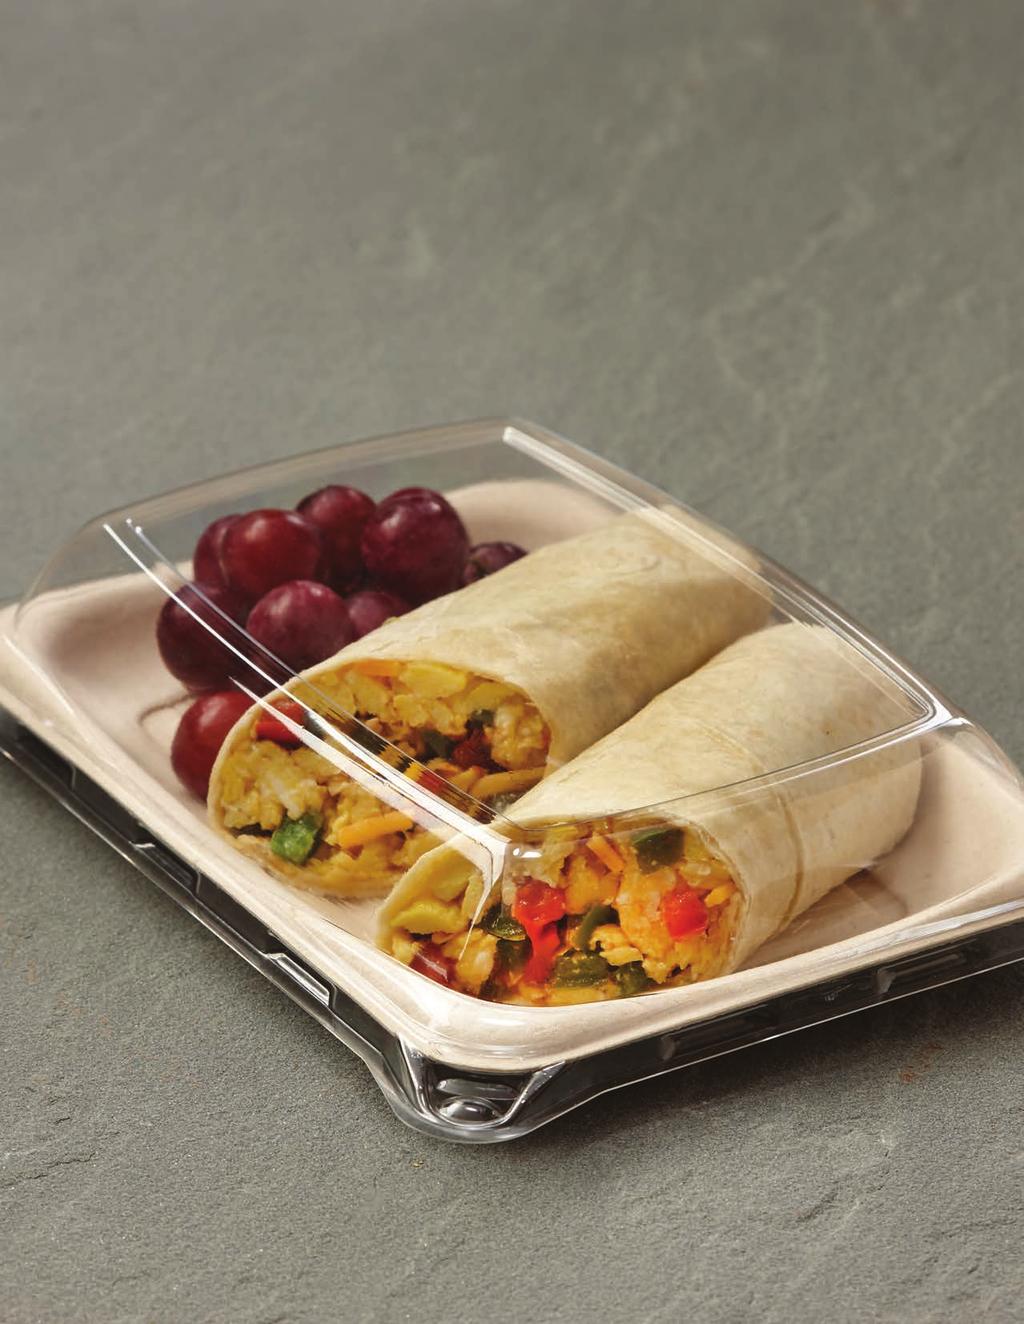 GRAB N GO COMPOSTING MEETS DURABILITY Sabert s grab n go containers are designed for longer